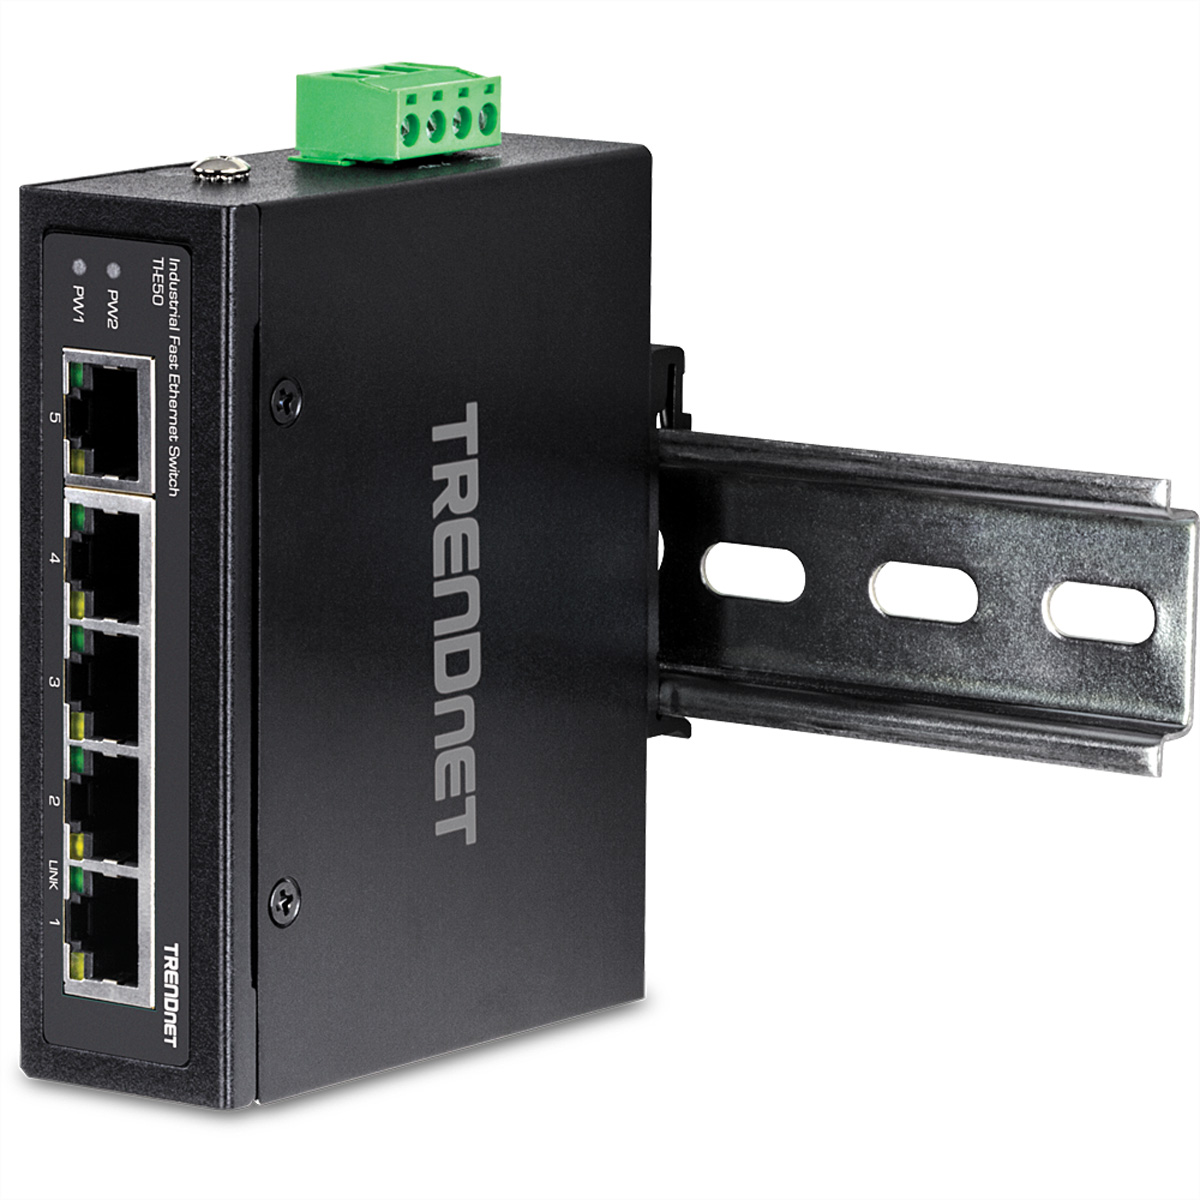 Networking TI-E50 Ethernet DIN-Rail Industrial Fast TRENDNET 5-Port Industrial Switch